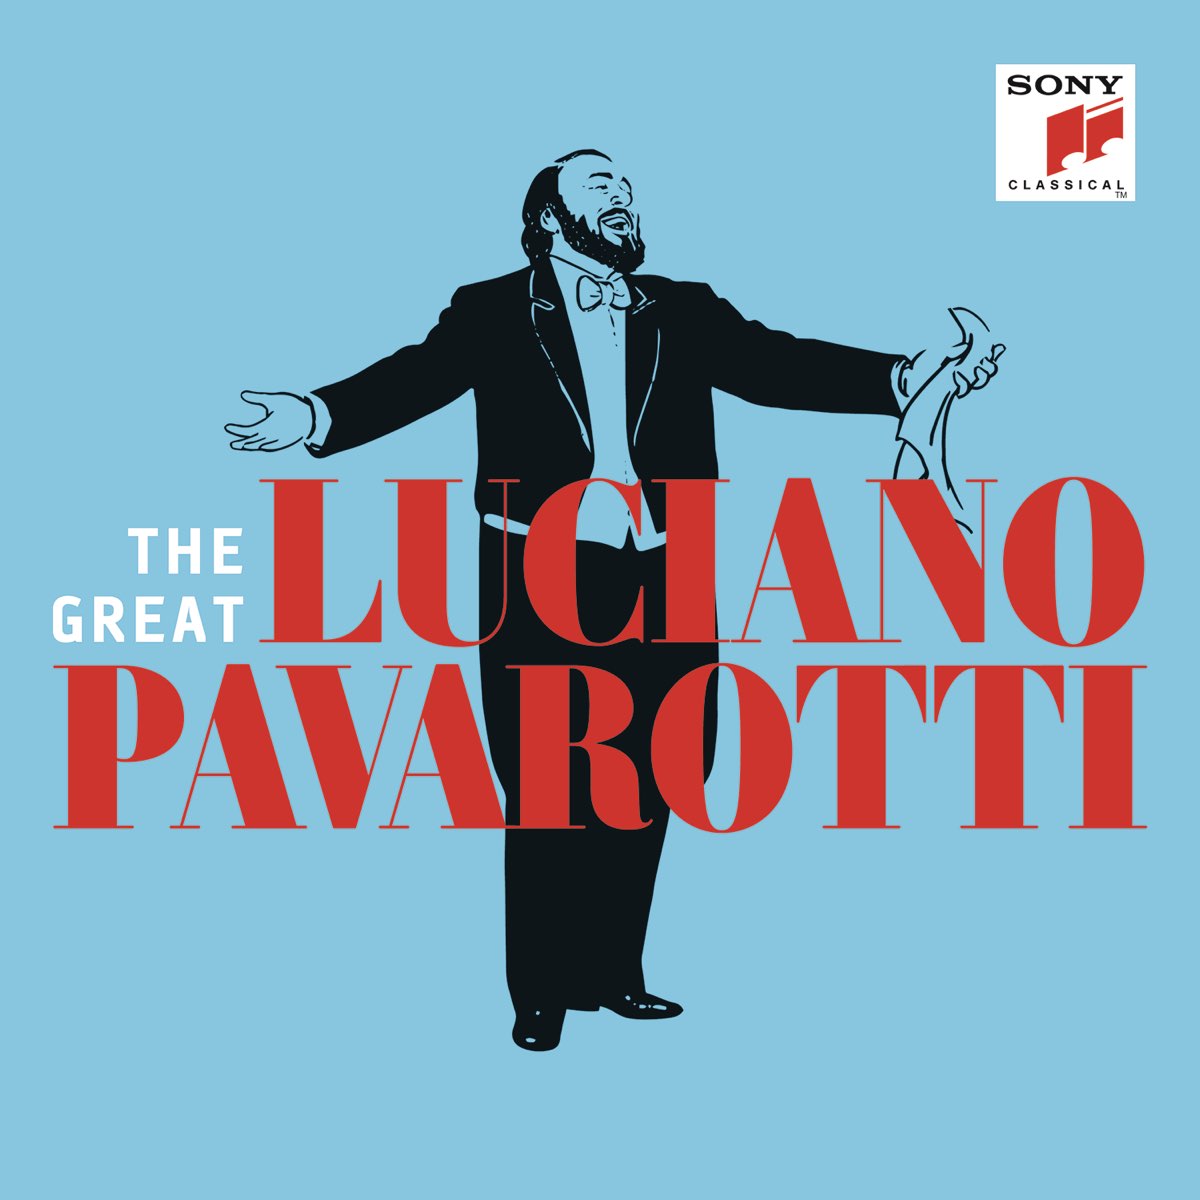 The Great Luciano Pavarotti by Luciano Pavarotti on Apple Music